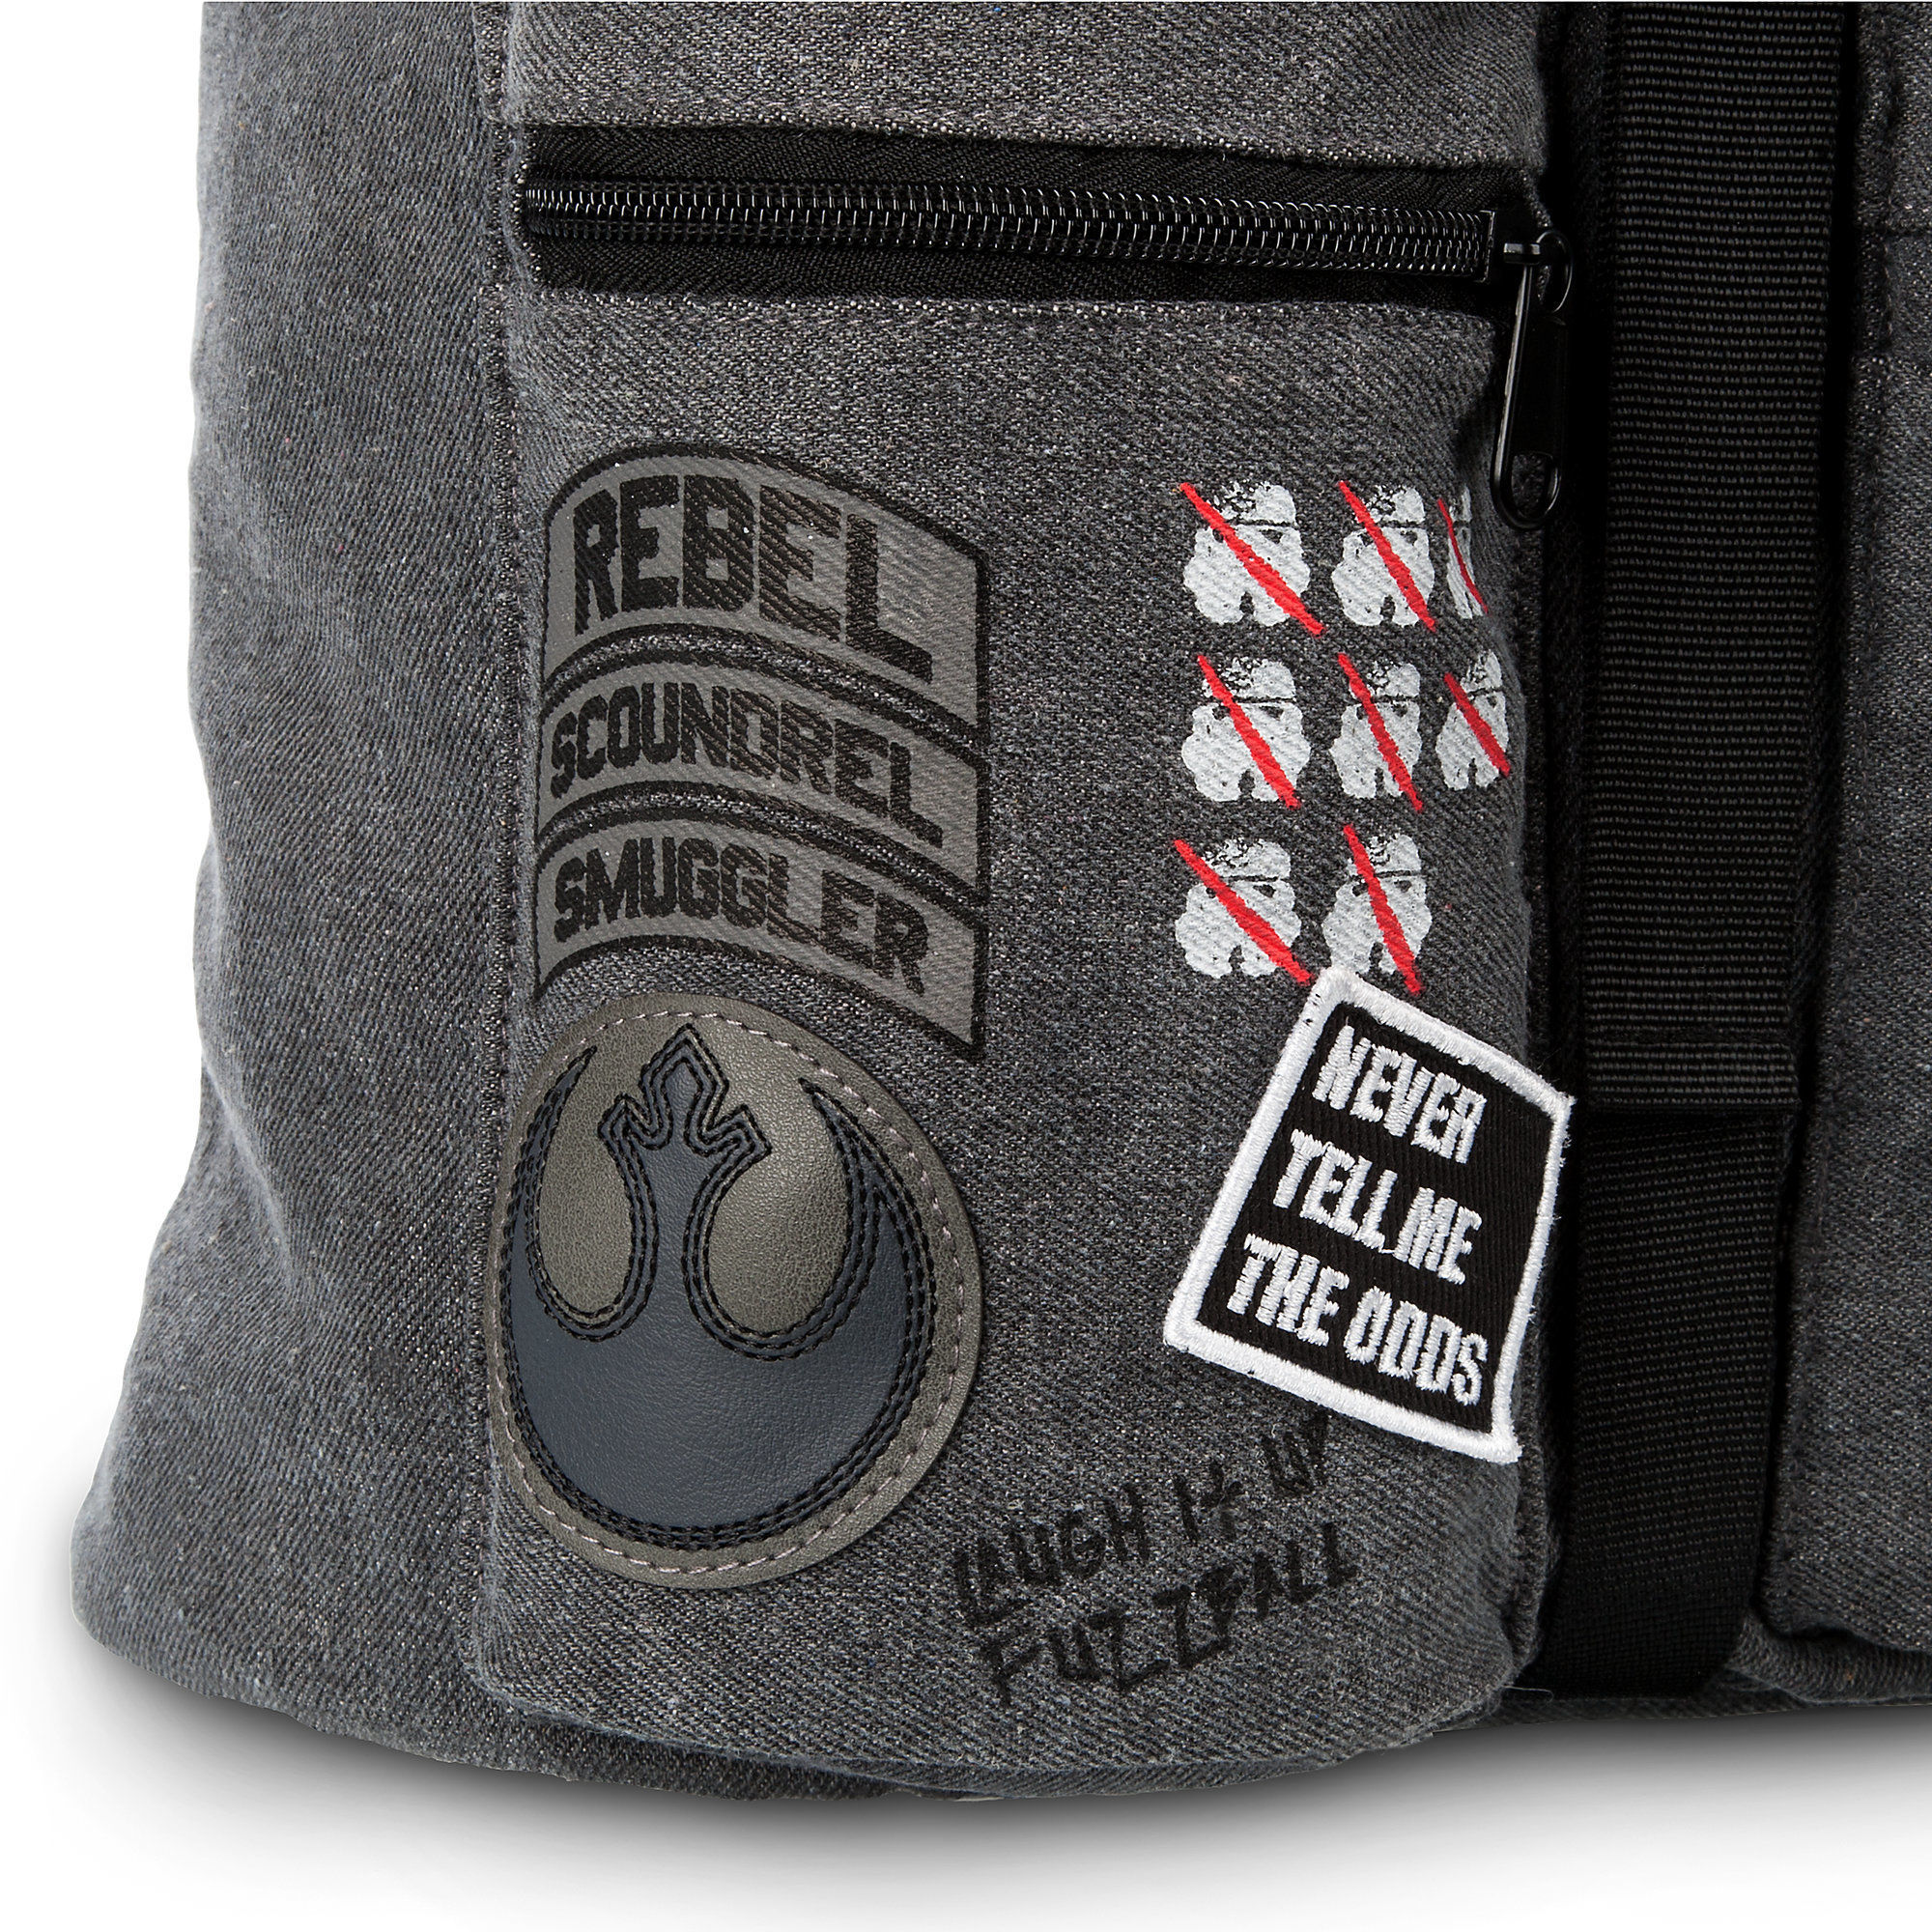 Loungefly x Star Wars Wookiee Backpack at Shop Disney